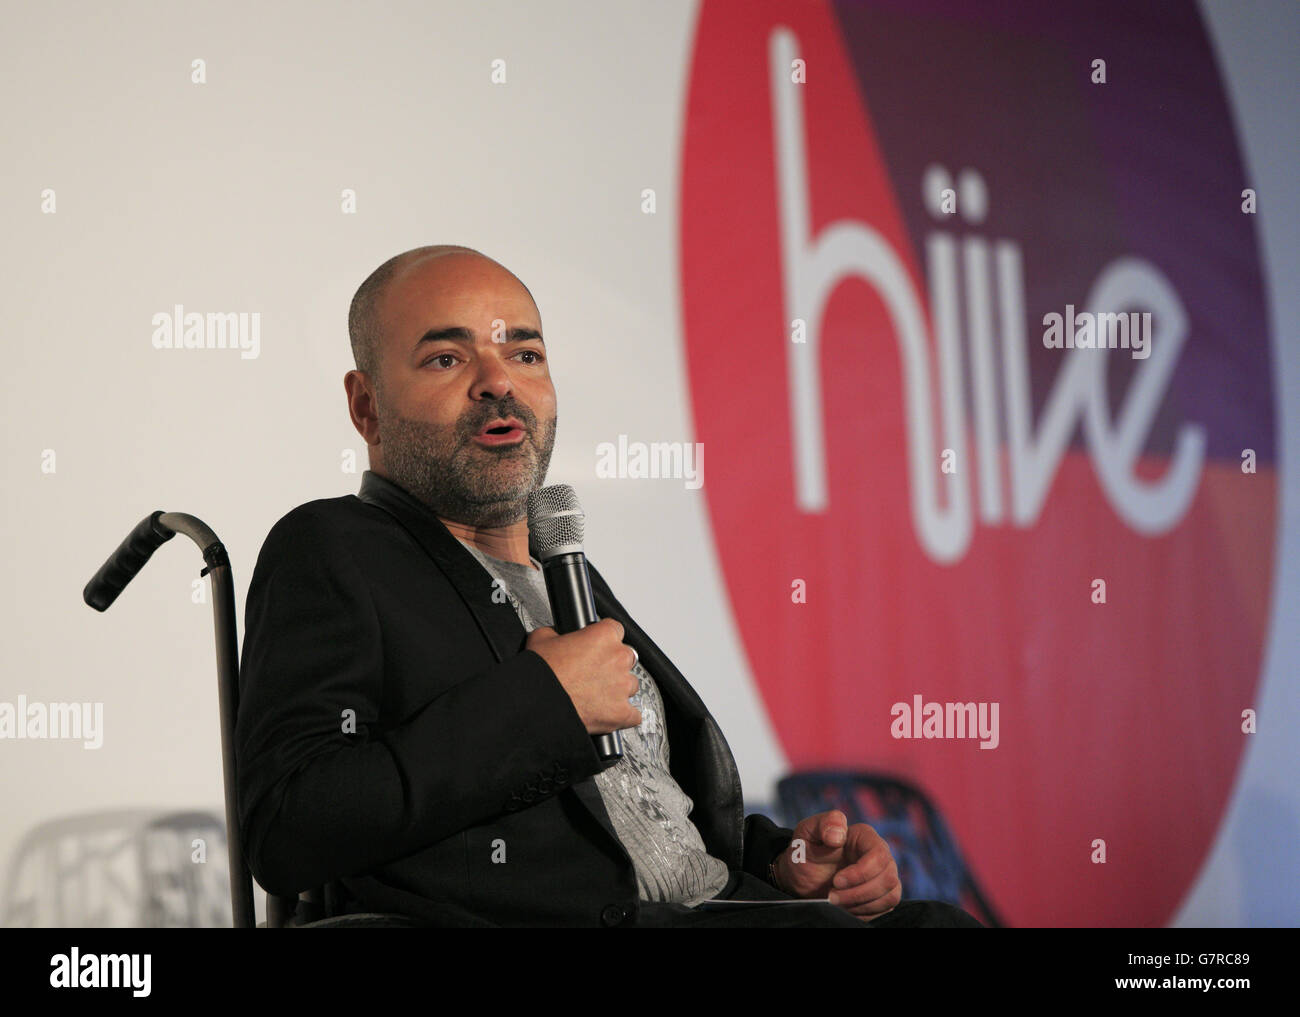 Ash Atalla, Television producer and Founder of Roughcut TV, at the launch of Hiive.co.uk - a professional networking, collaboration and job-finding tool for UK creatives, at The Trampery in east London. Stock Photo